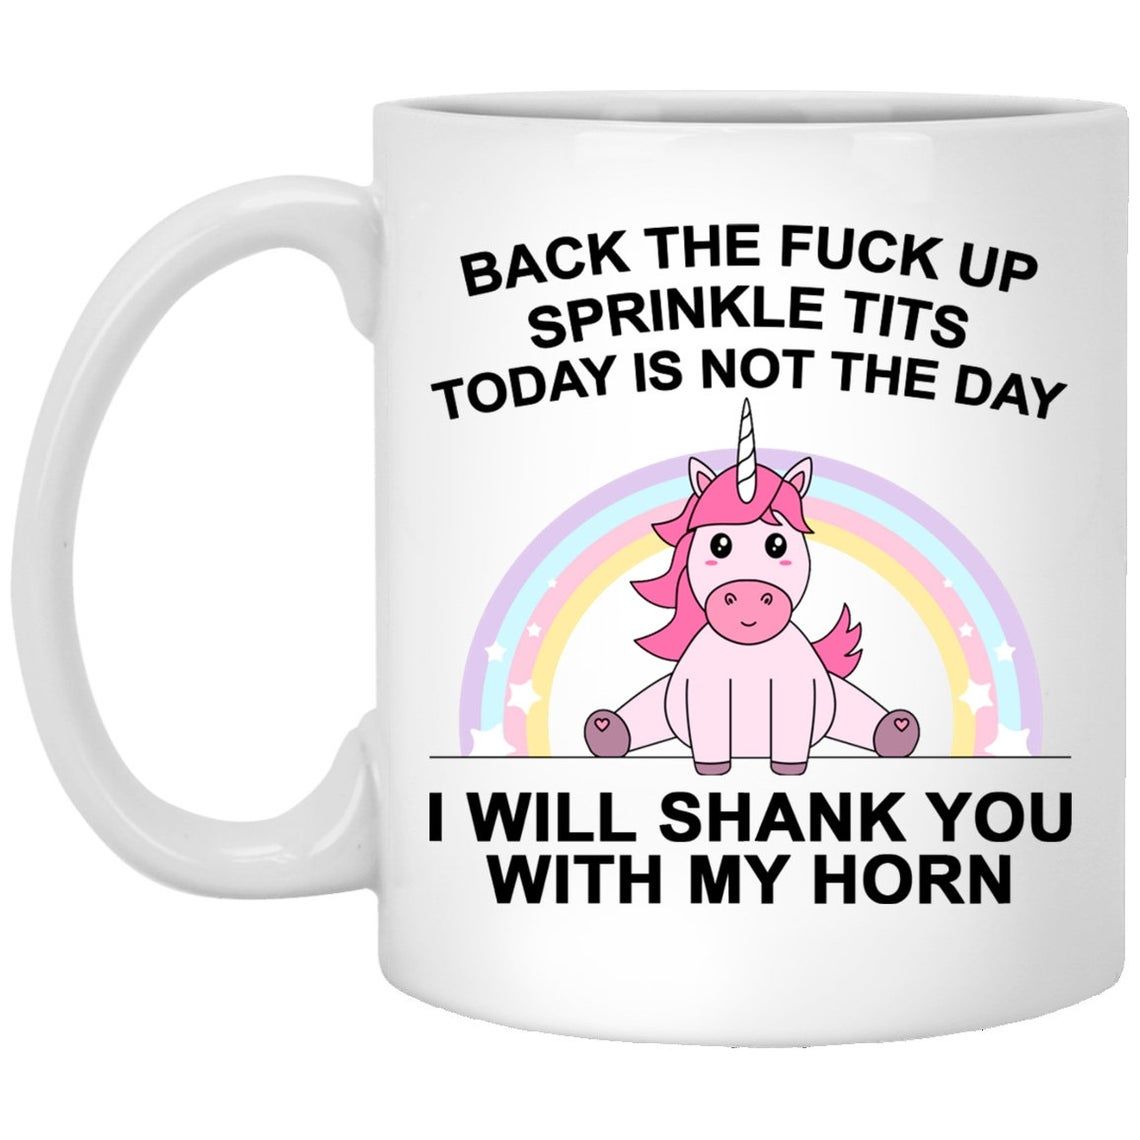 Back the fuck up sprinkle tits today is not the day coffee mug Style: 11oz Mug, Color: White